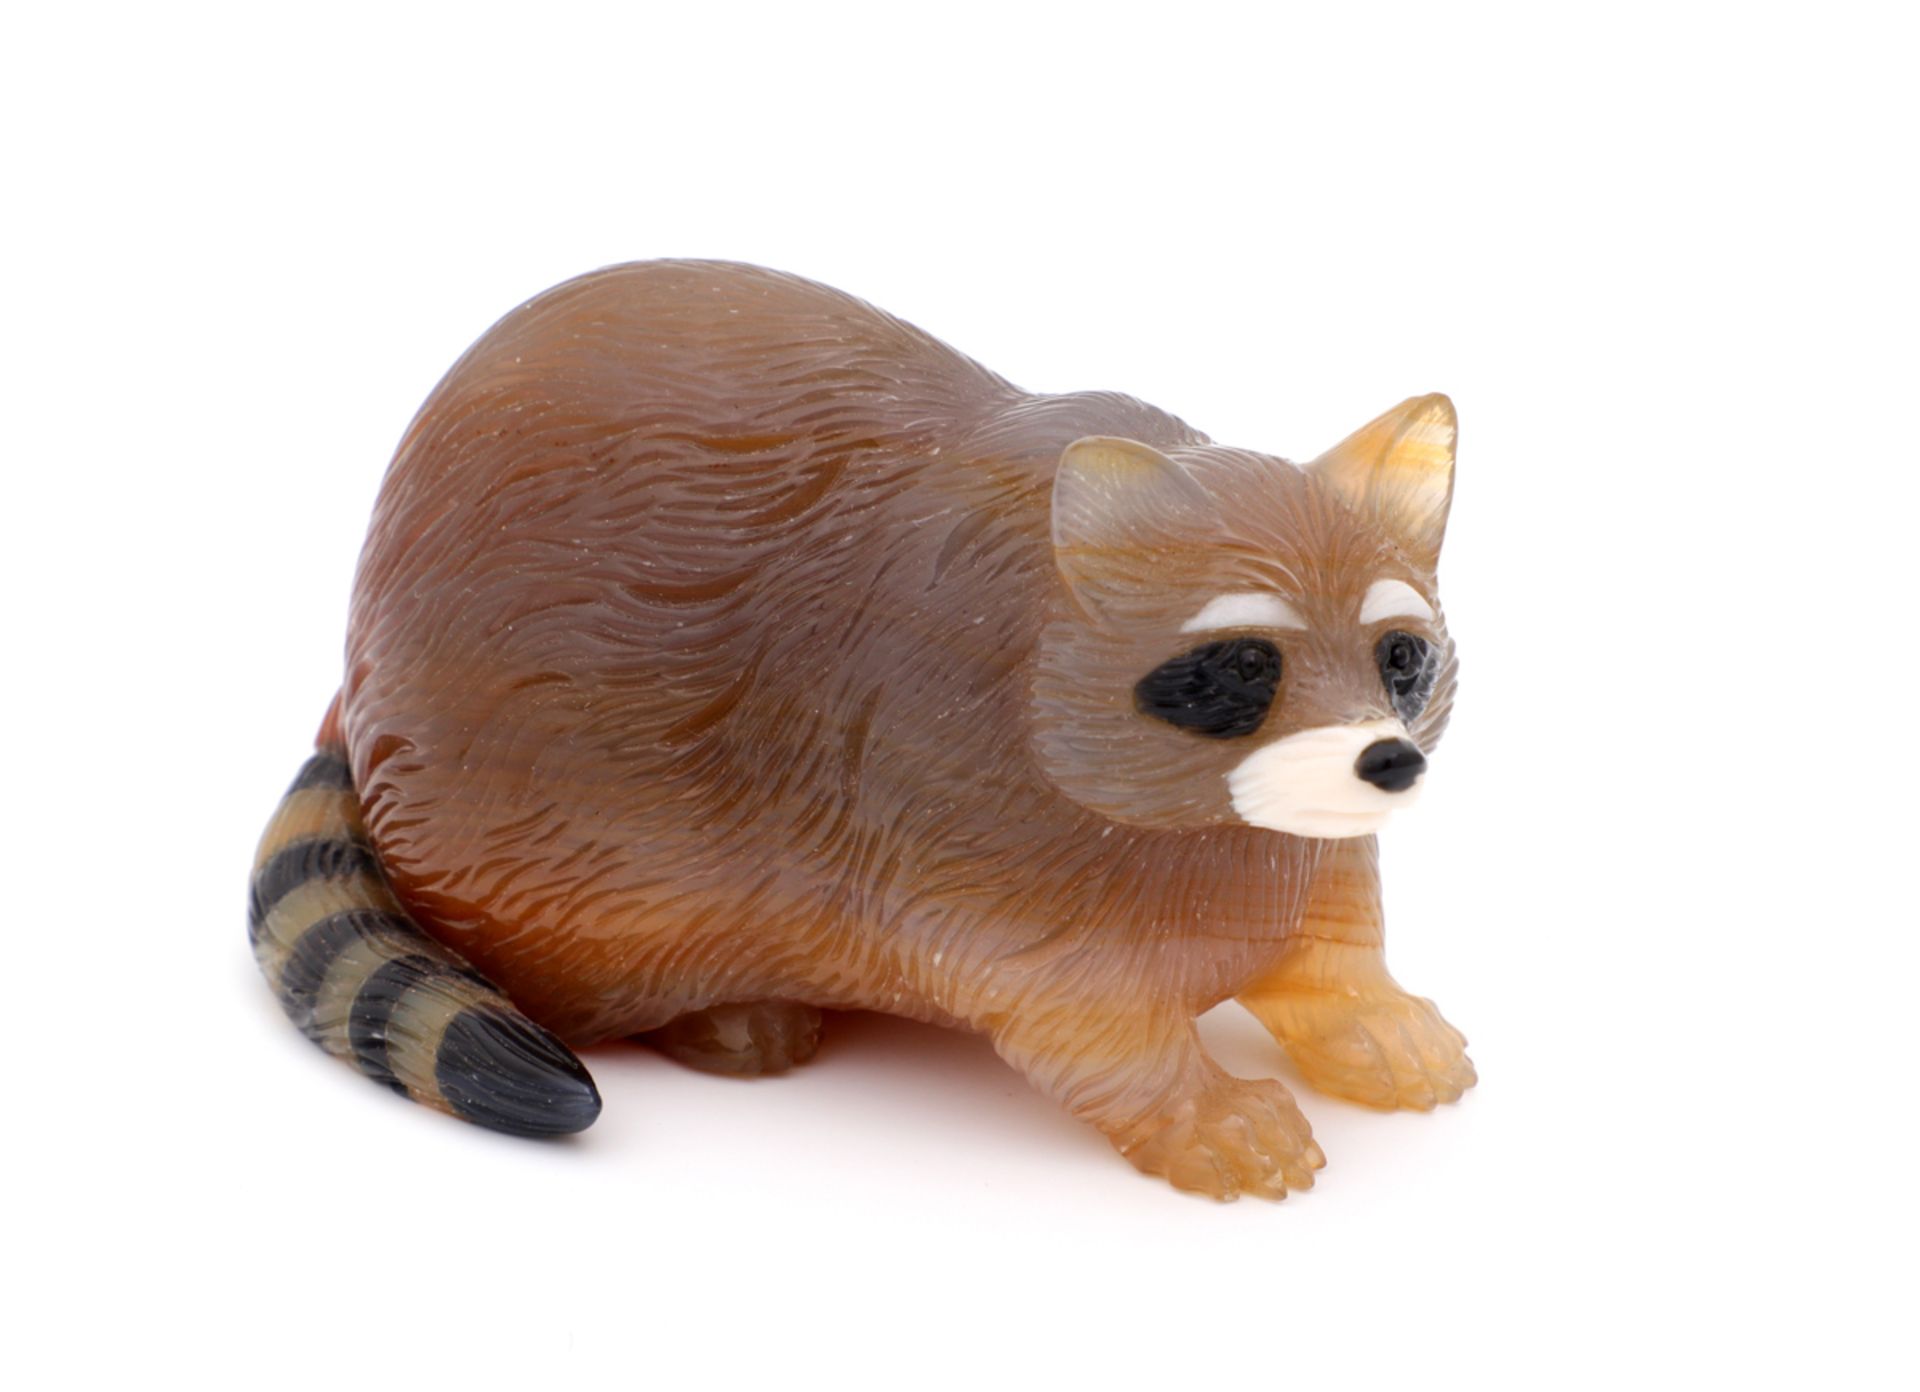 AN AGATE RACCOON Carved agate on several shades, Fabergé style, 20th Century. Length: 9 cm.